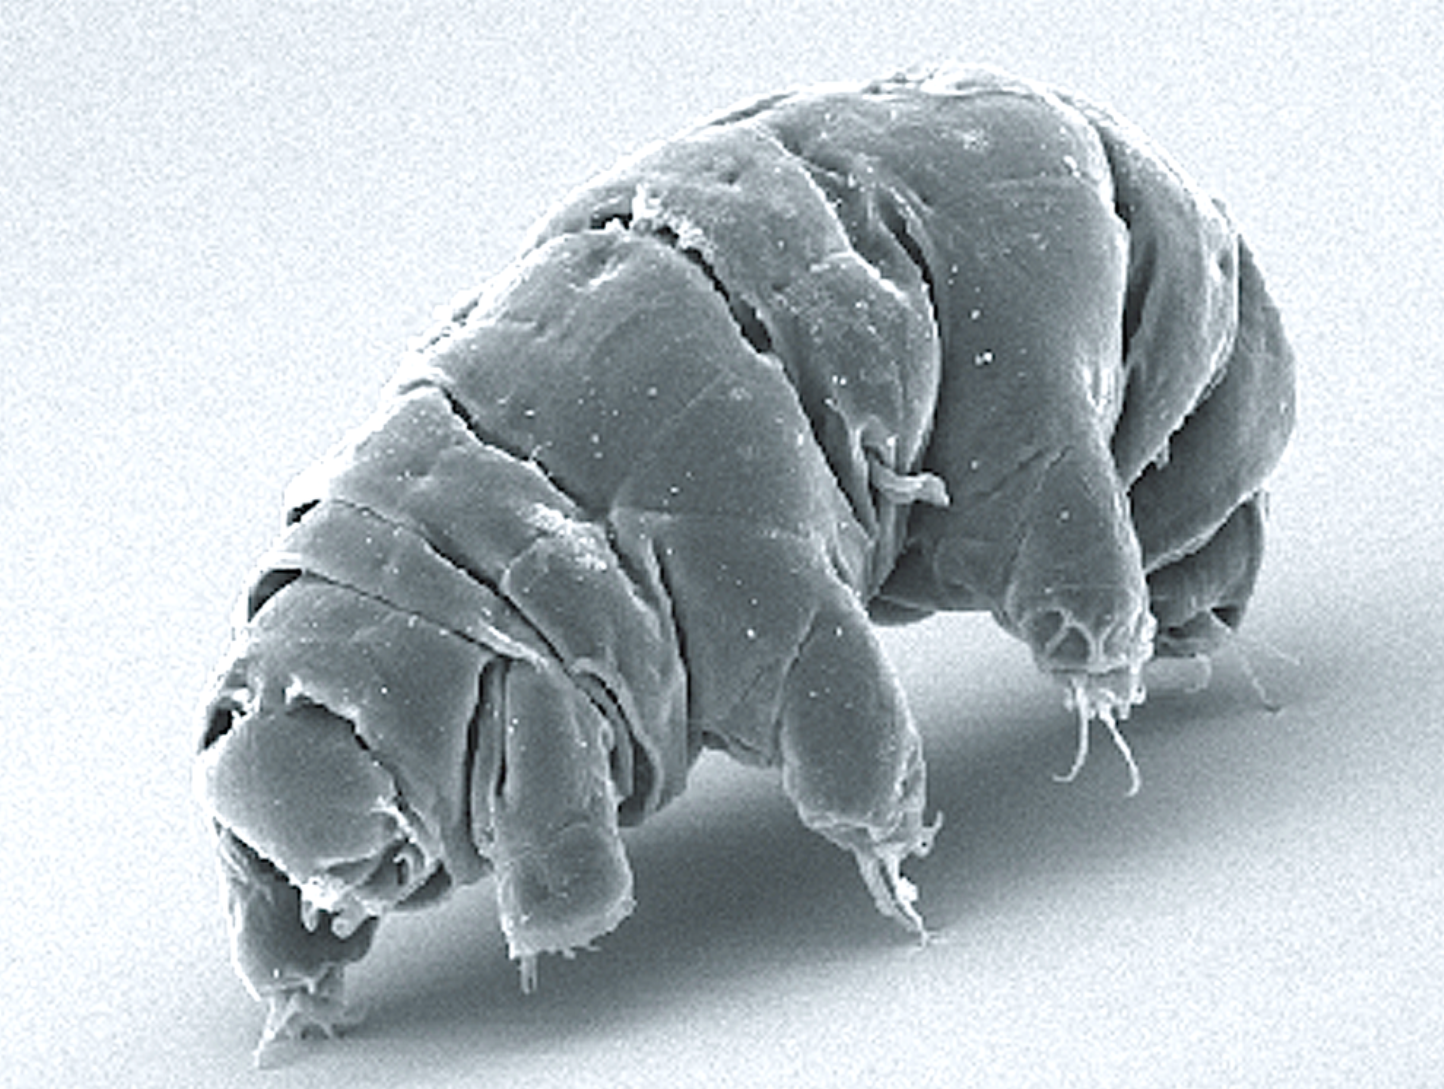 University Of Wyoming’s Boothby Receives NASA Grant To Study Effects Of Water Loss on Tardigrades